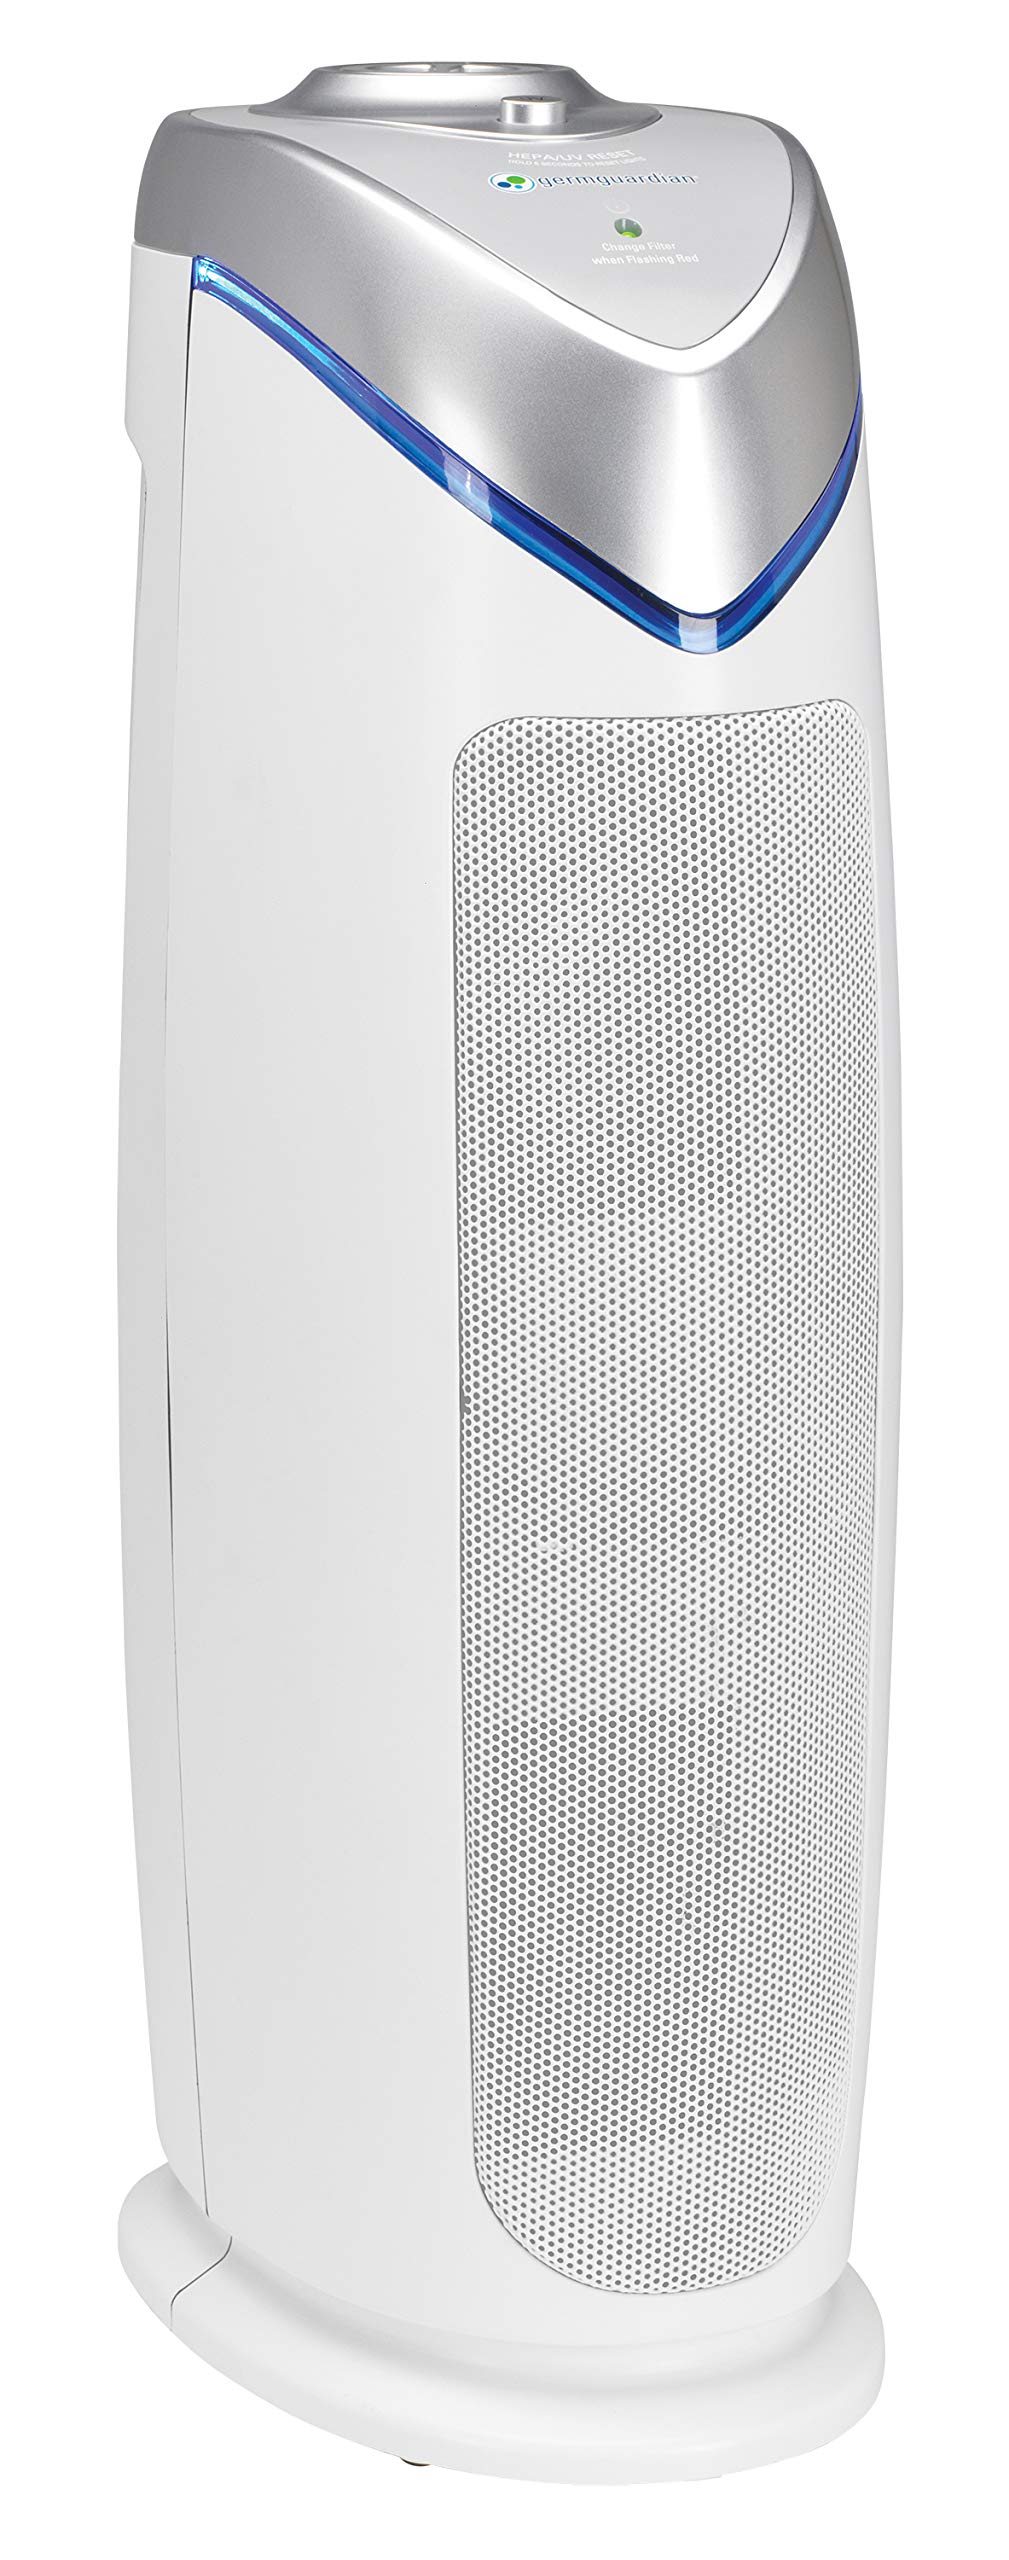 Save $20 -> $79.99 on GermGuardian AC4825W HEPA Air Purifier with UV Light for large rooms at Amazon